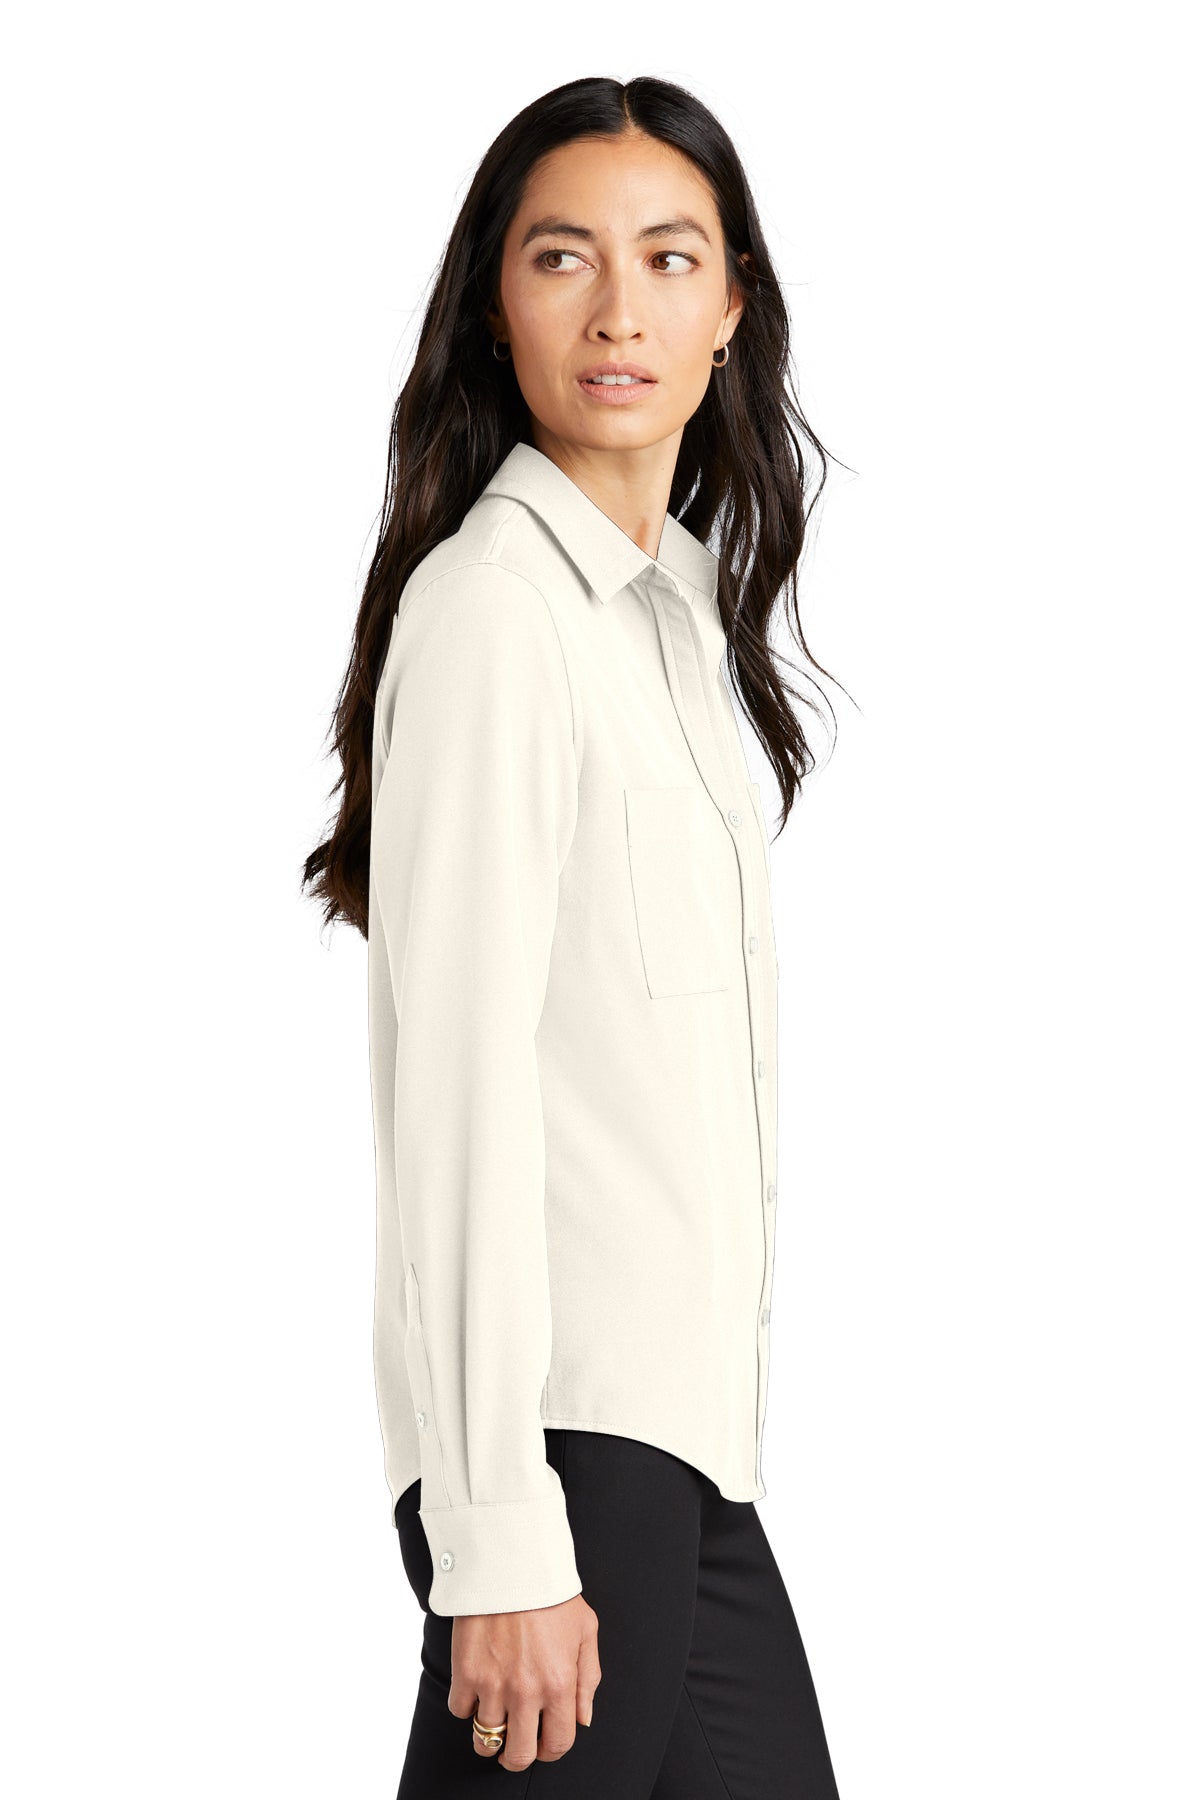 Monique Button Up Long Sleeve Blouse - Ivory Chiffon (Ships in 1-2 Weeks)